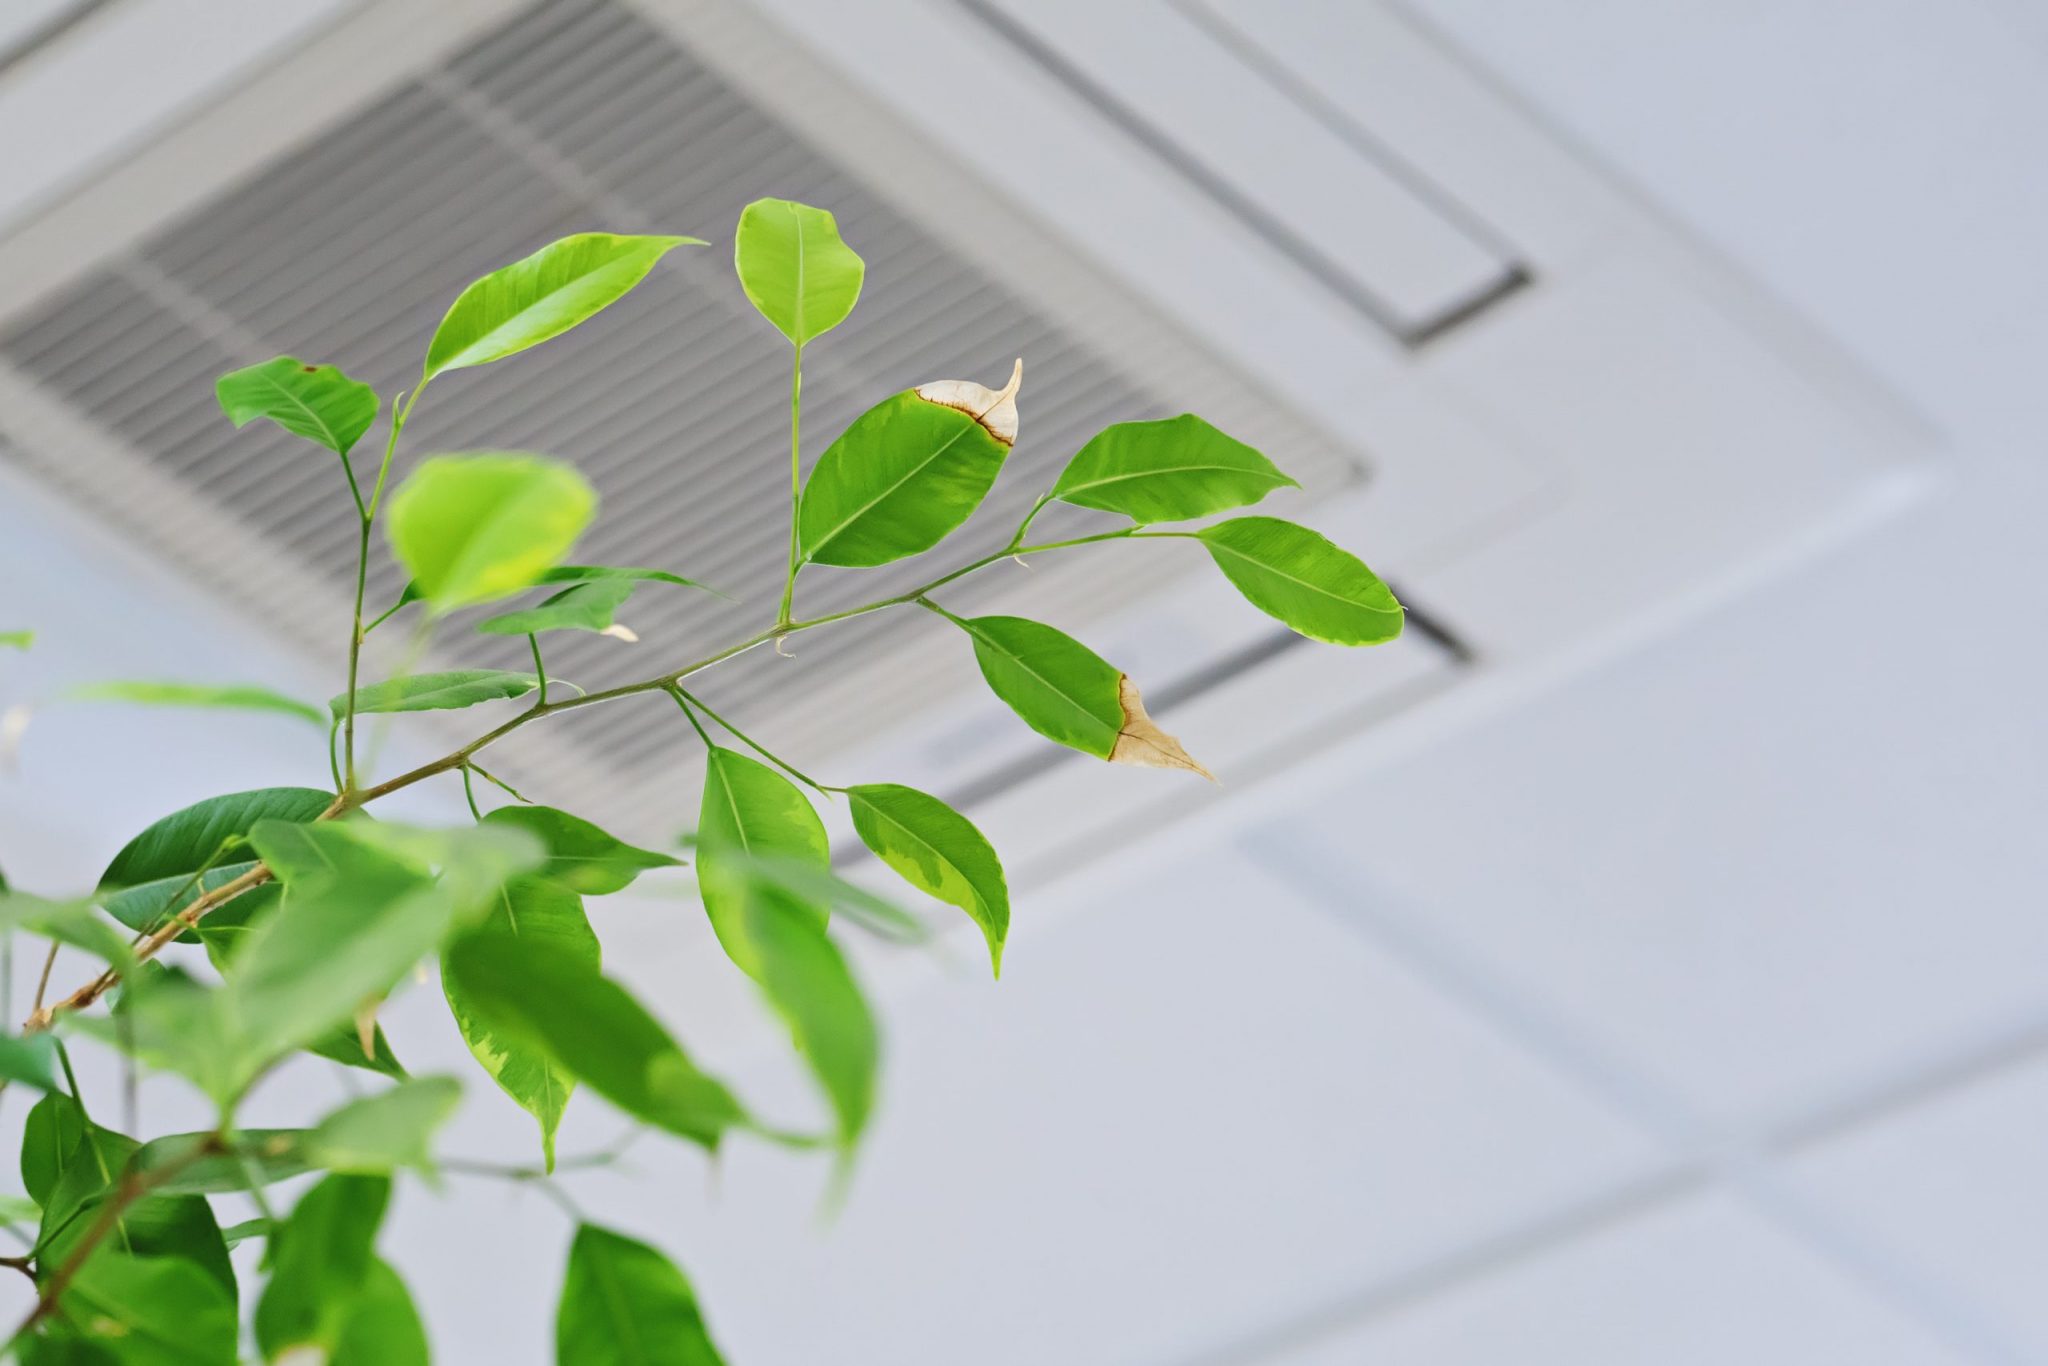 Plant with leaves browning at the tip in the foreground of an air vent in the ceiling.